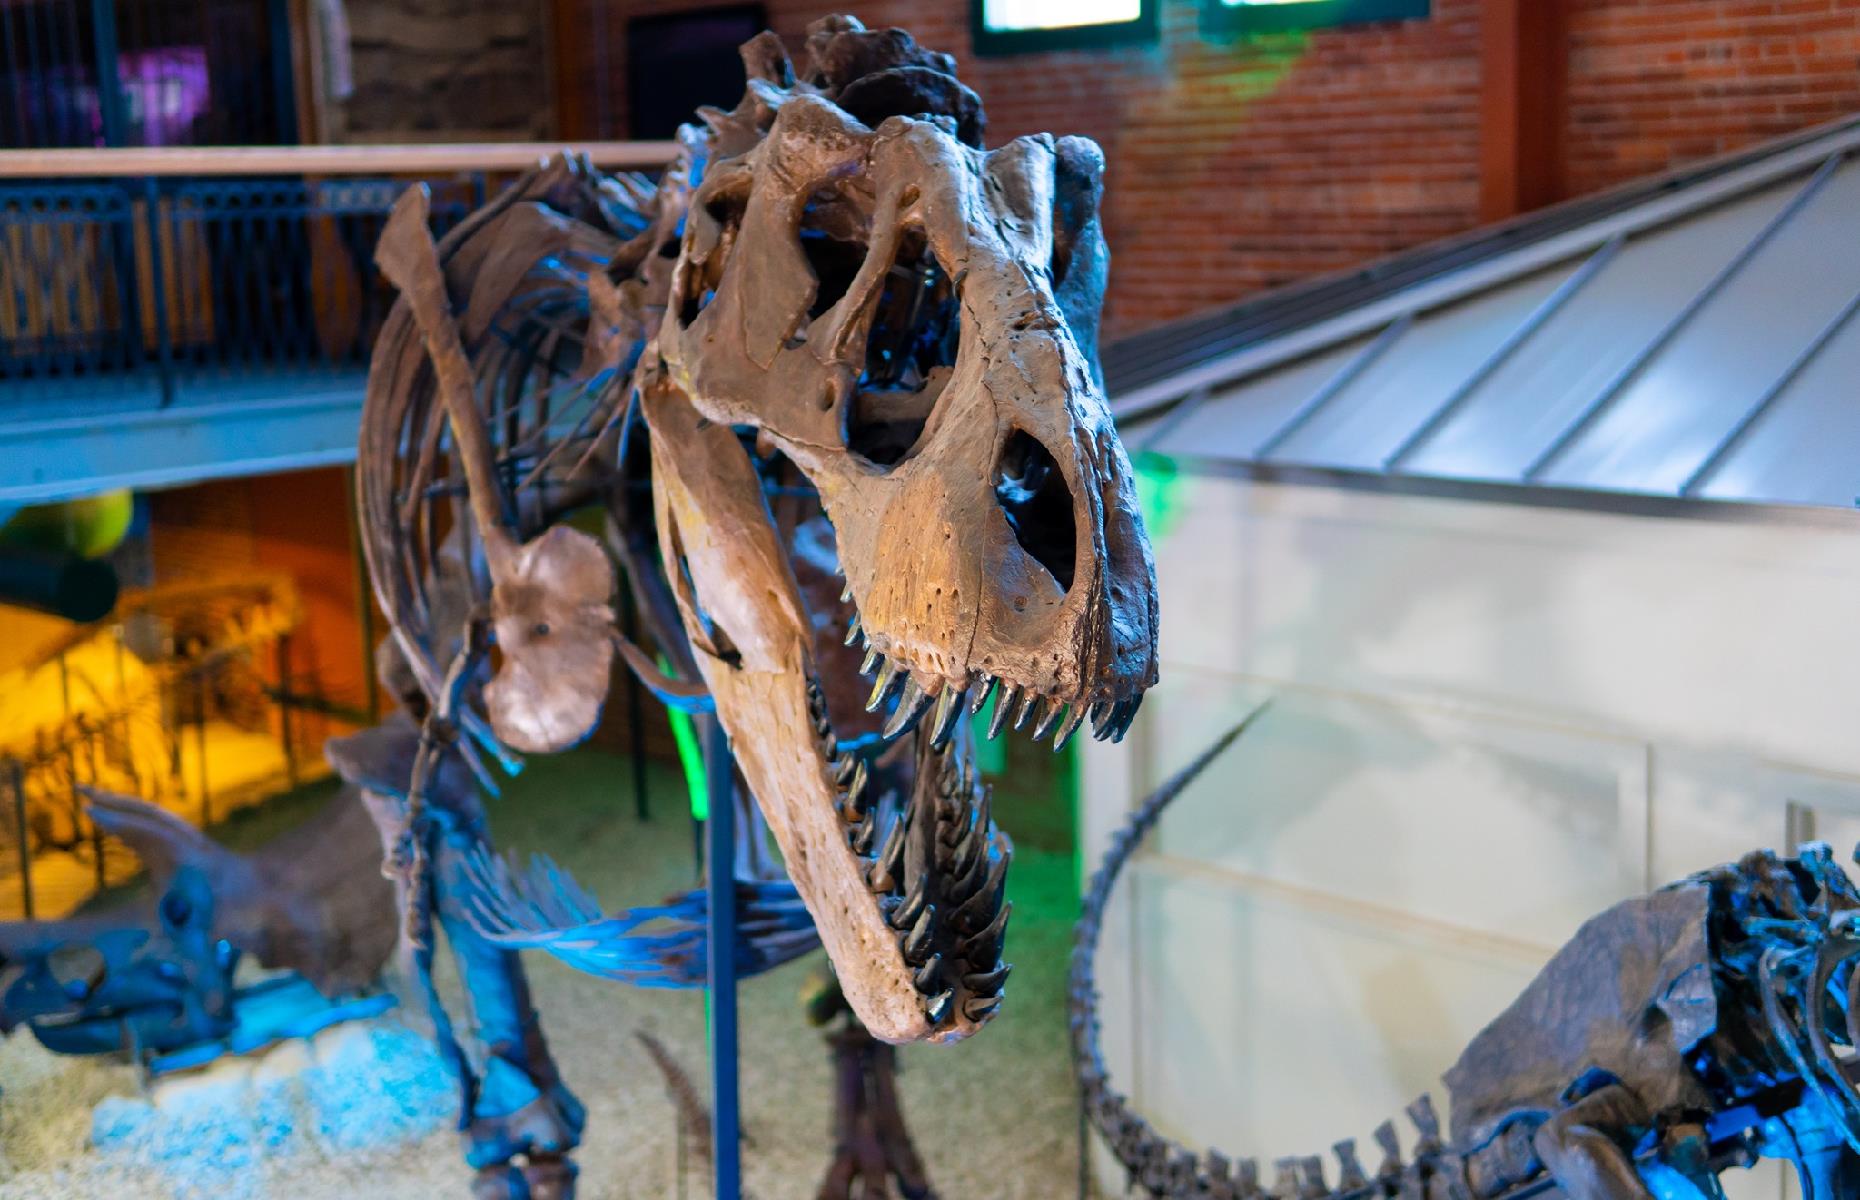 <p>Dinosaurs, Egyptian mummies, a shrunken head… this Wichita museum is filled with treasures that will delight curious kids and adults alike. The <a href="https://worldtreasures.org/">Museum of World Treasures</a> focuses on global history, from the US Civil War to ancient Greece and Rome. Kids will also love taking part in scavenger hunts and escape-room style challenges.</p>